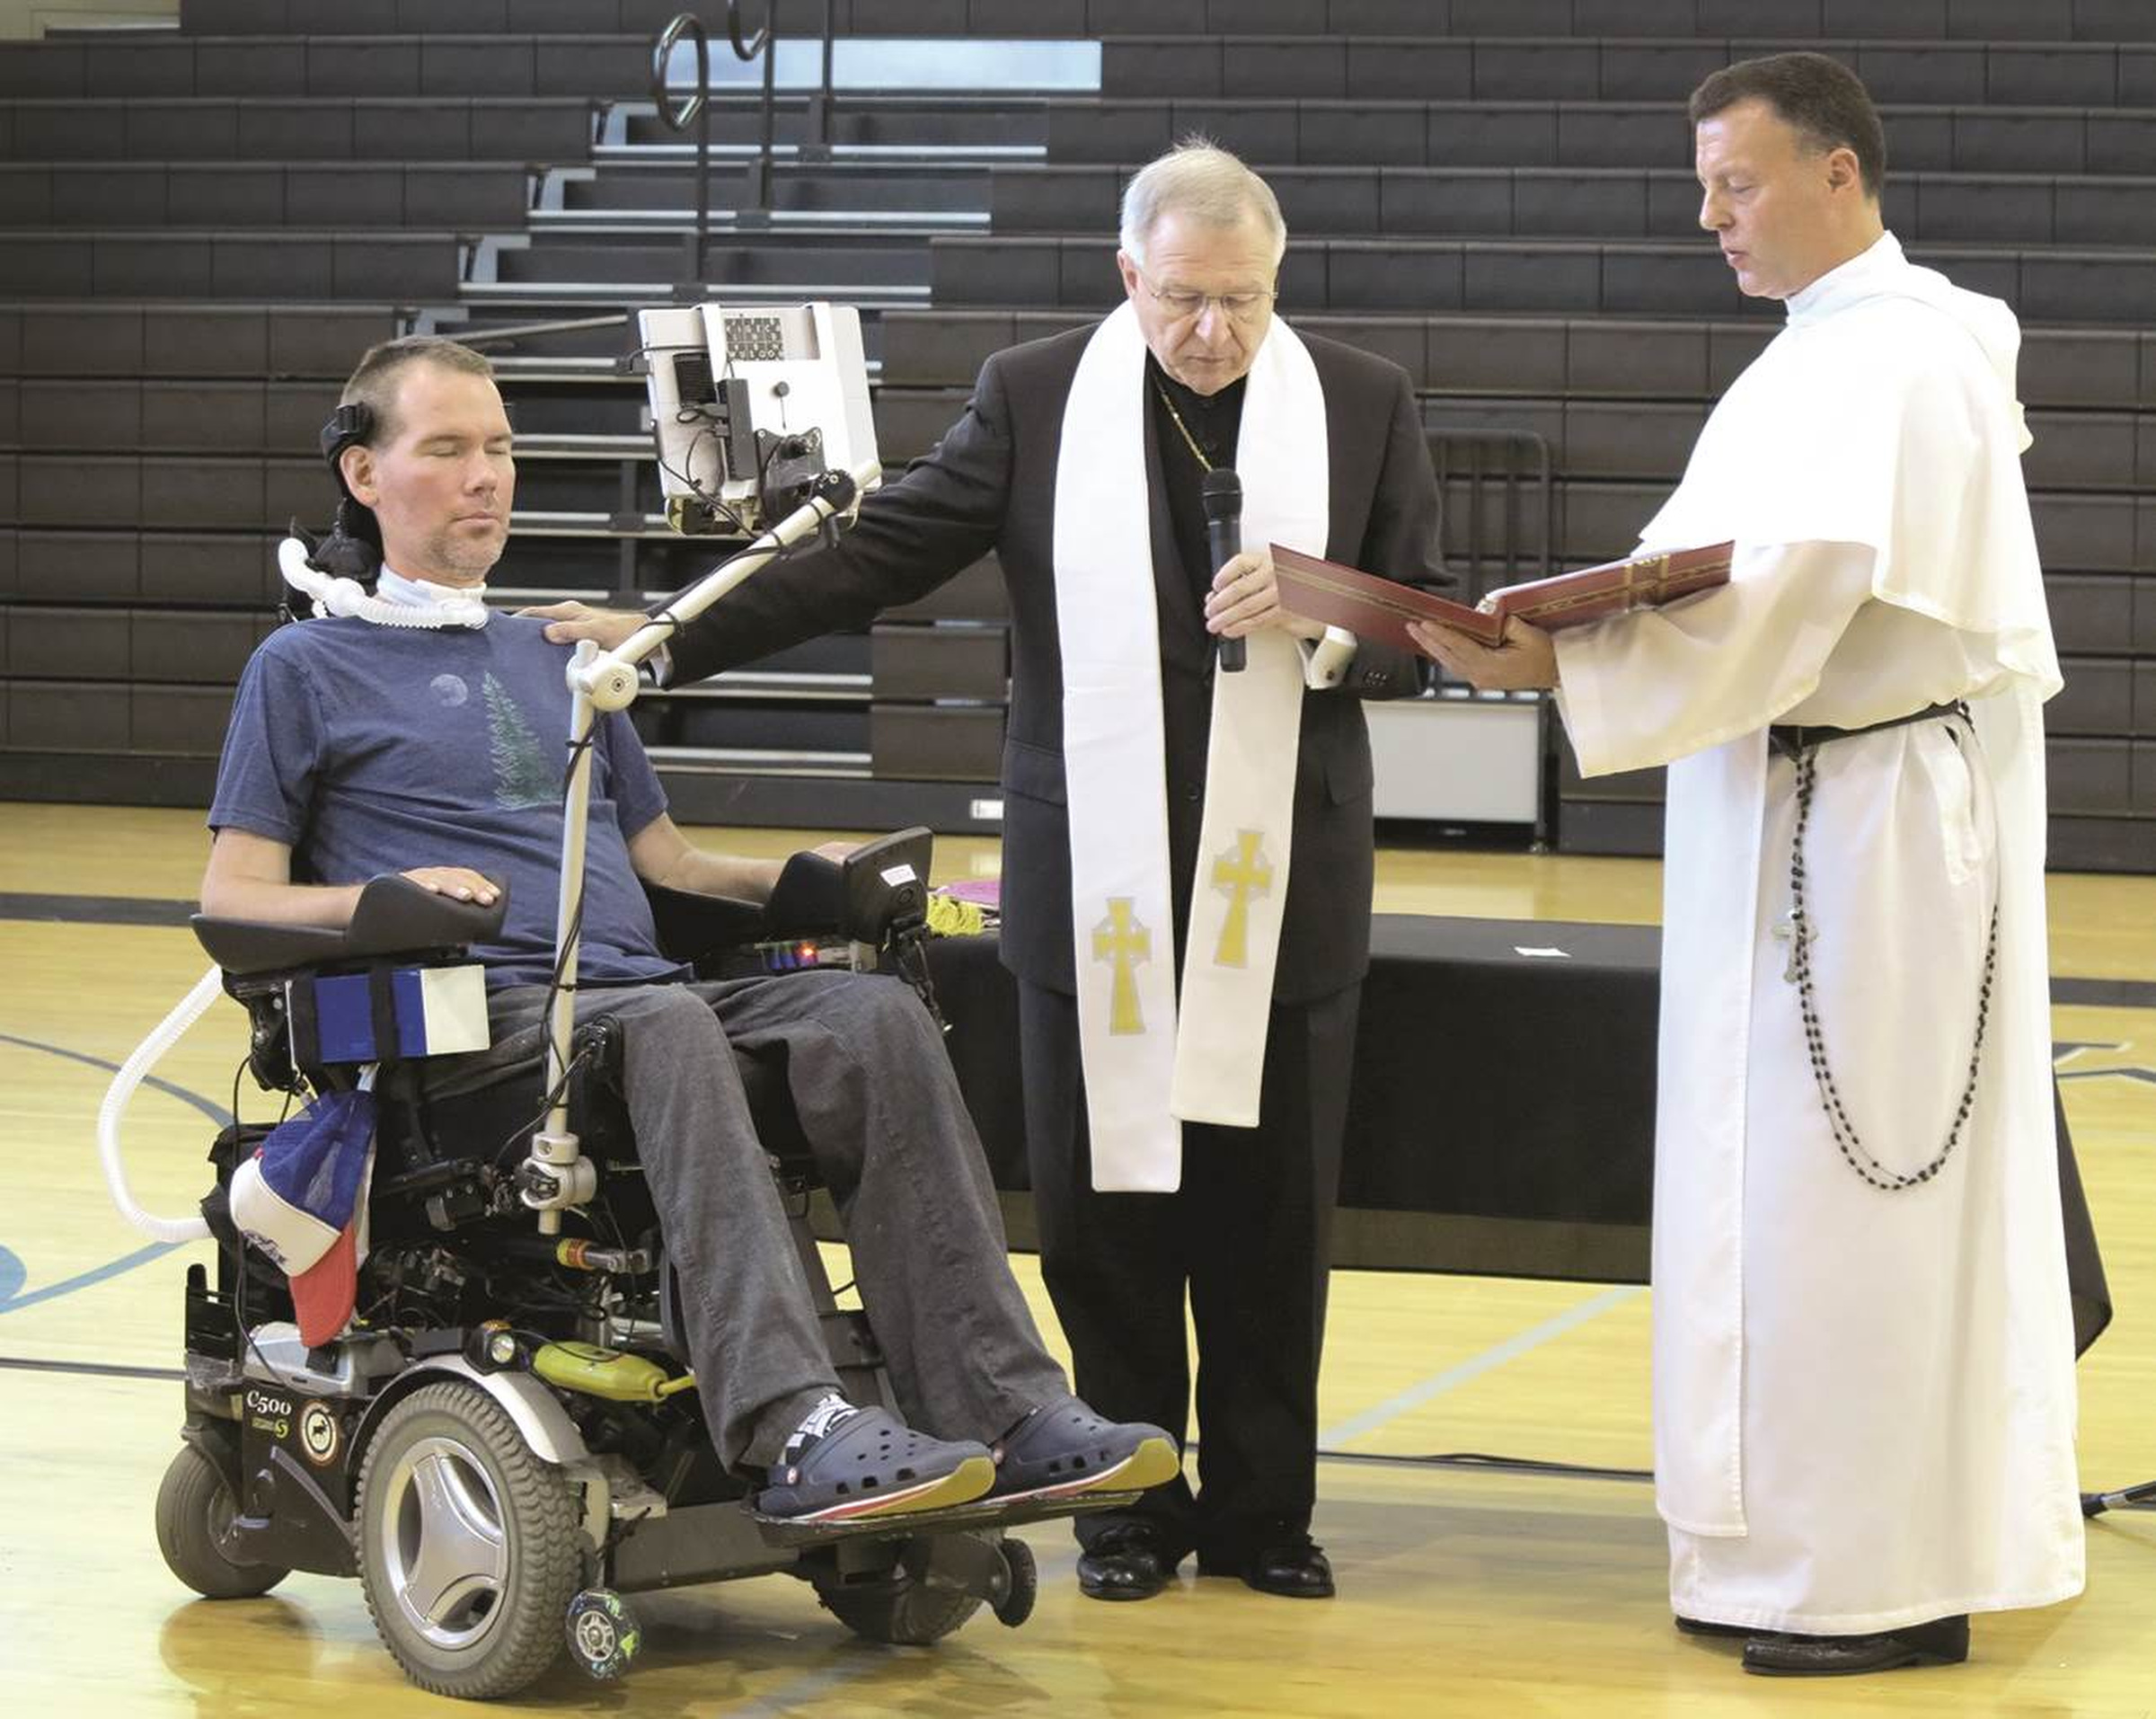 New Orleans Archbishop Gregory M. Aymond confers the sacrament of the sick June 18 on former New Orleans Saints special teamer Steve Gleason, who has been battling amyotrophic lateral sclerosis, or ALS, since 2011 and has established a foundation to help others with the disease get the assistive "eye-tracking" technology to help them communicate. (CNS photo/Christine Bordelon, Clarion Herald) See SAINTS-GLEASON-FAITH Aug. 2, 2016.